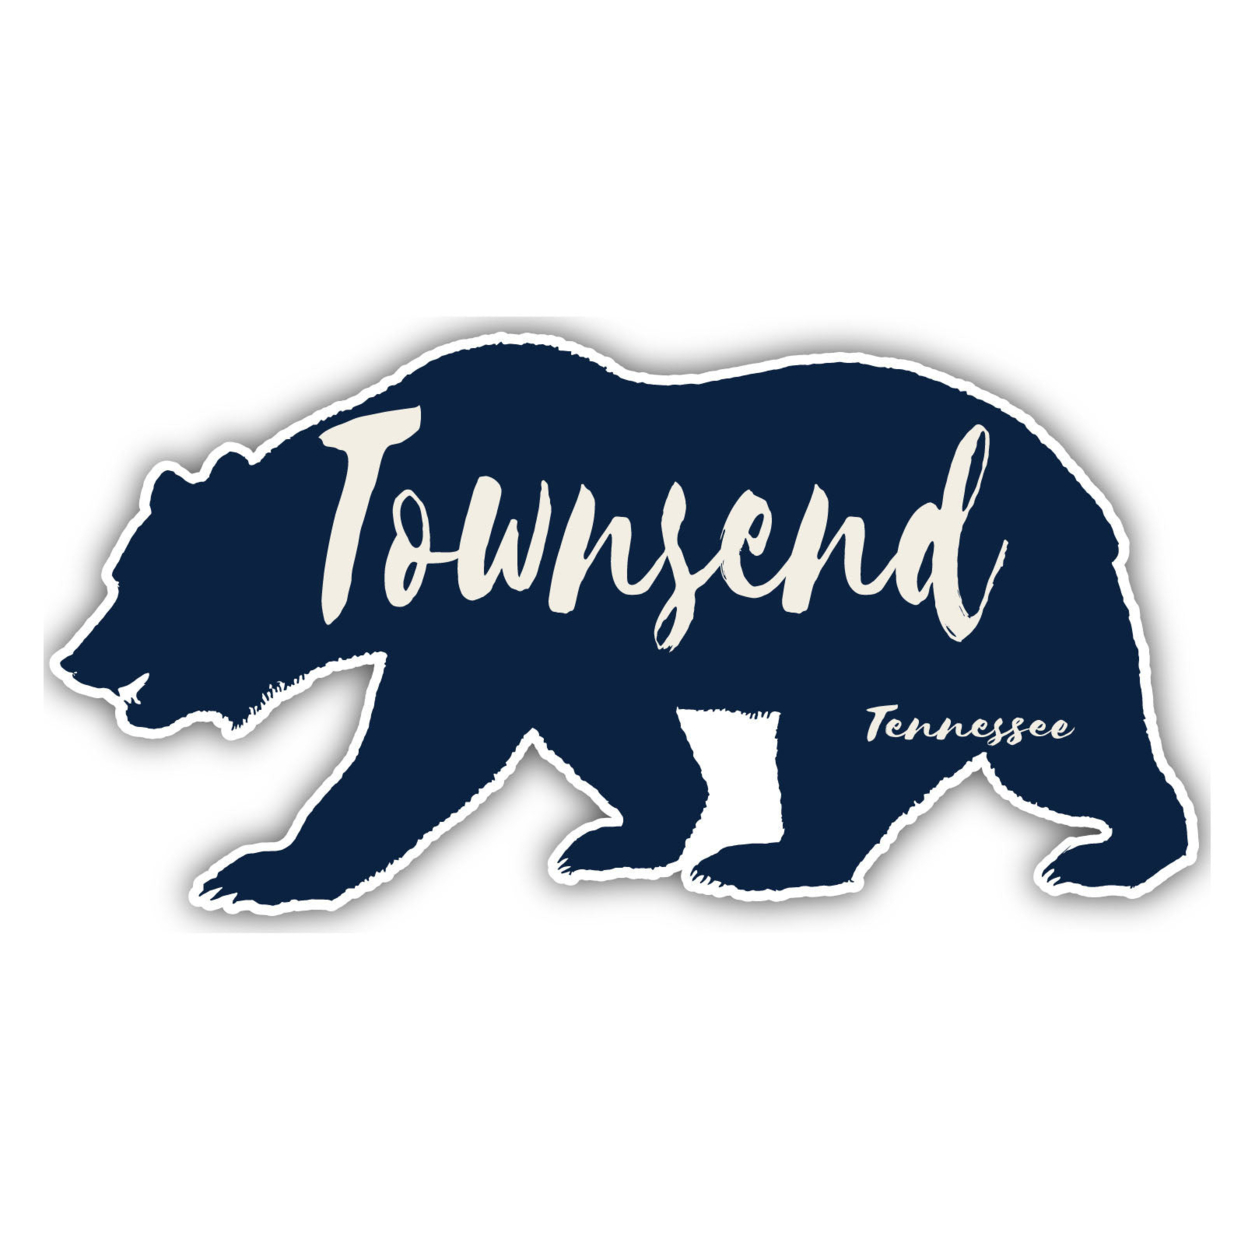 Townsend Tennessee Souvenir Decorative Stickers (Choose Theme And Size) - Single Unit, 2-Inch, Bear